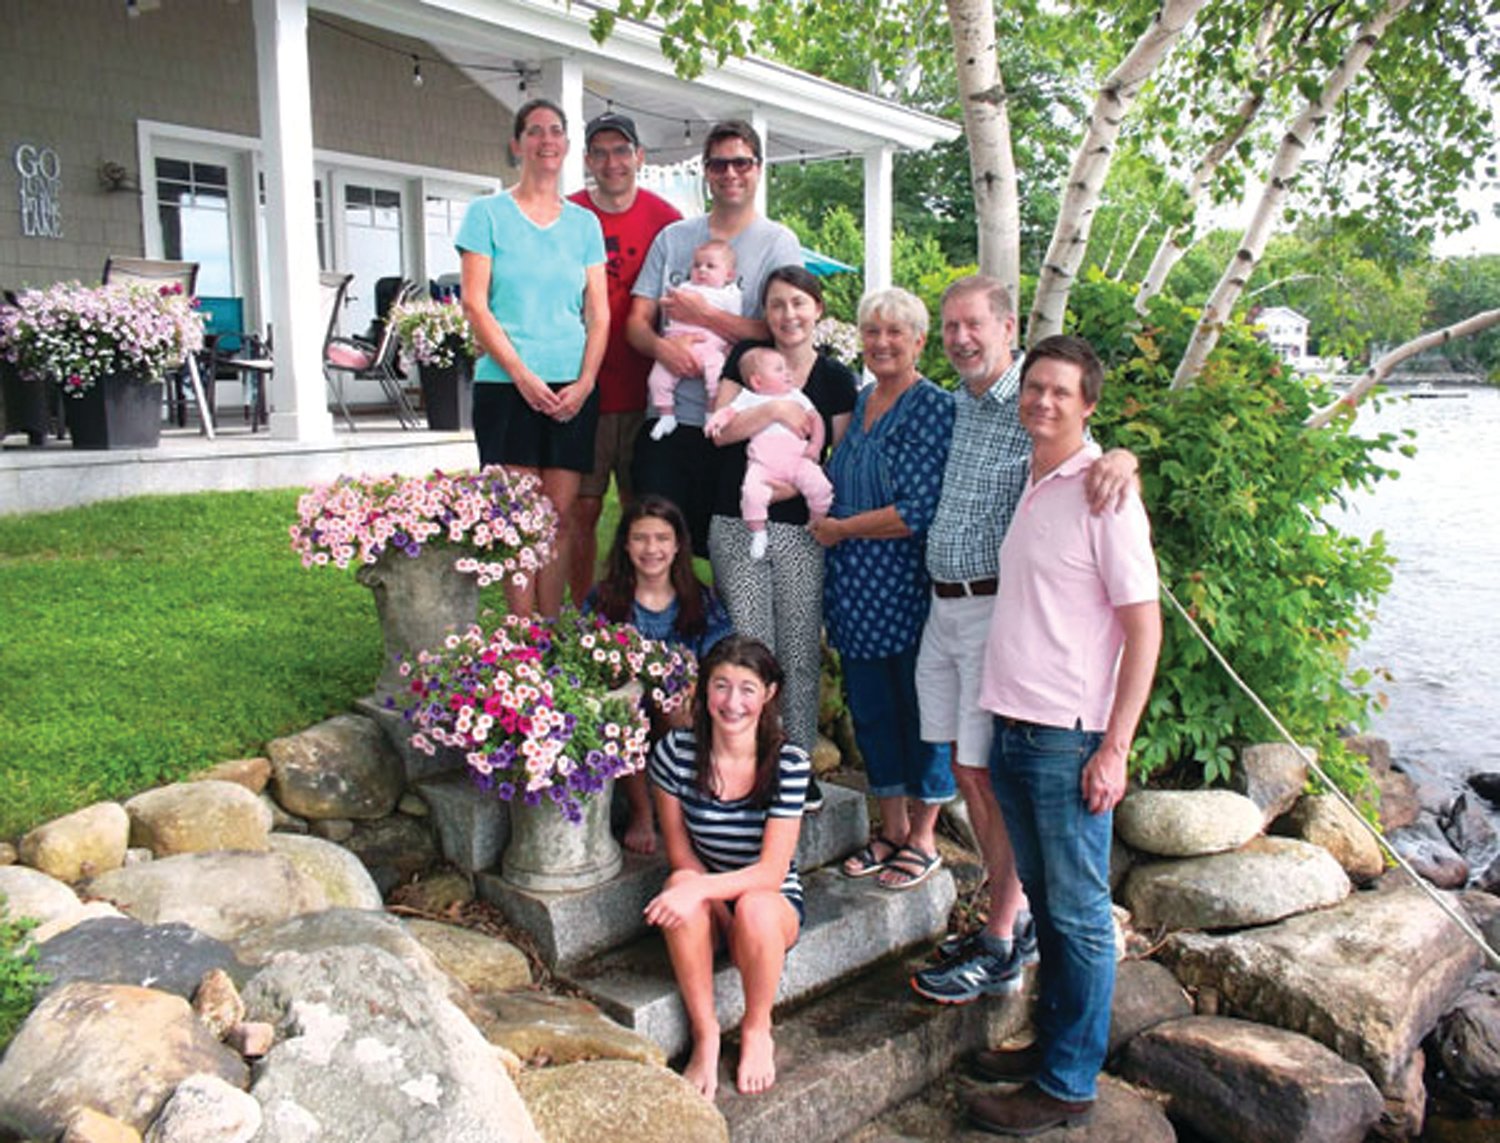 WITH THE FAMILY: Martin “Marty” Podskoch is pictured at his home on Lake Pocotopaug in East Hampton, Connecticut, with members of his family. Seated are Lydia and Kira Roloff, and standing, left to right, are Kristy and Matt Roloff, Ryan and Jenna with Lily Ann and Anna Lee Podskoch, Lynn, Marty and Mattew Podskoch.